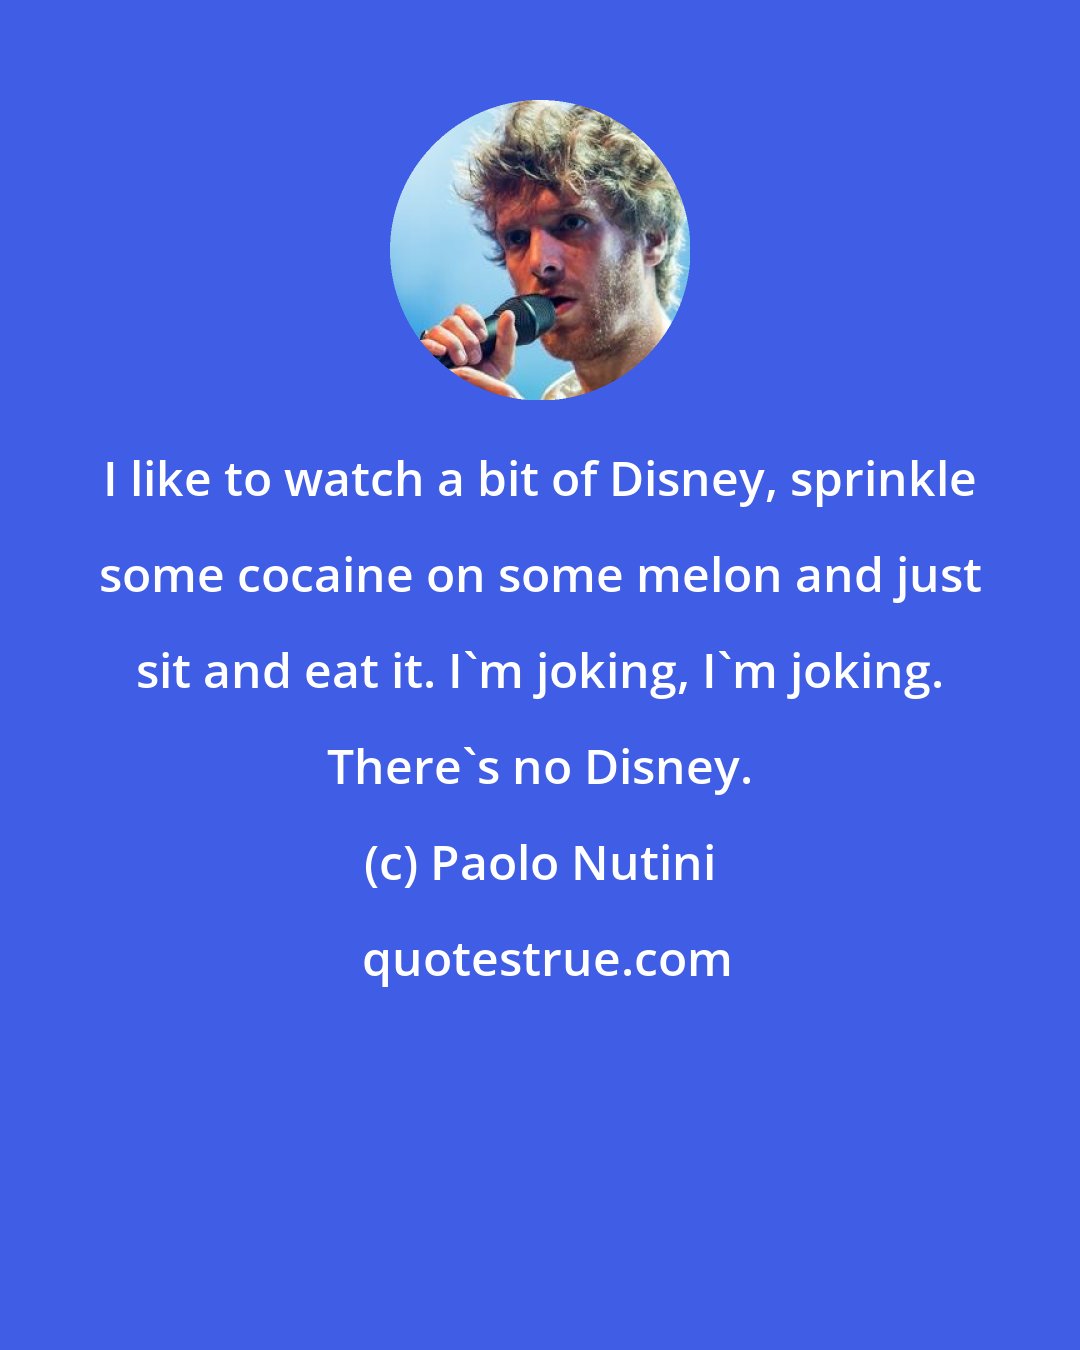 Paolo Nutini: I like to watch a bit of Disney, sprinkle some cocaine on some melon and just sit and eat it. I'm joking, I'm joking. There's no Disney.